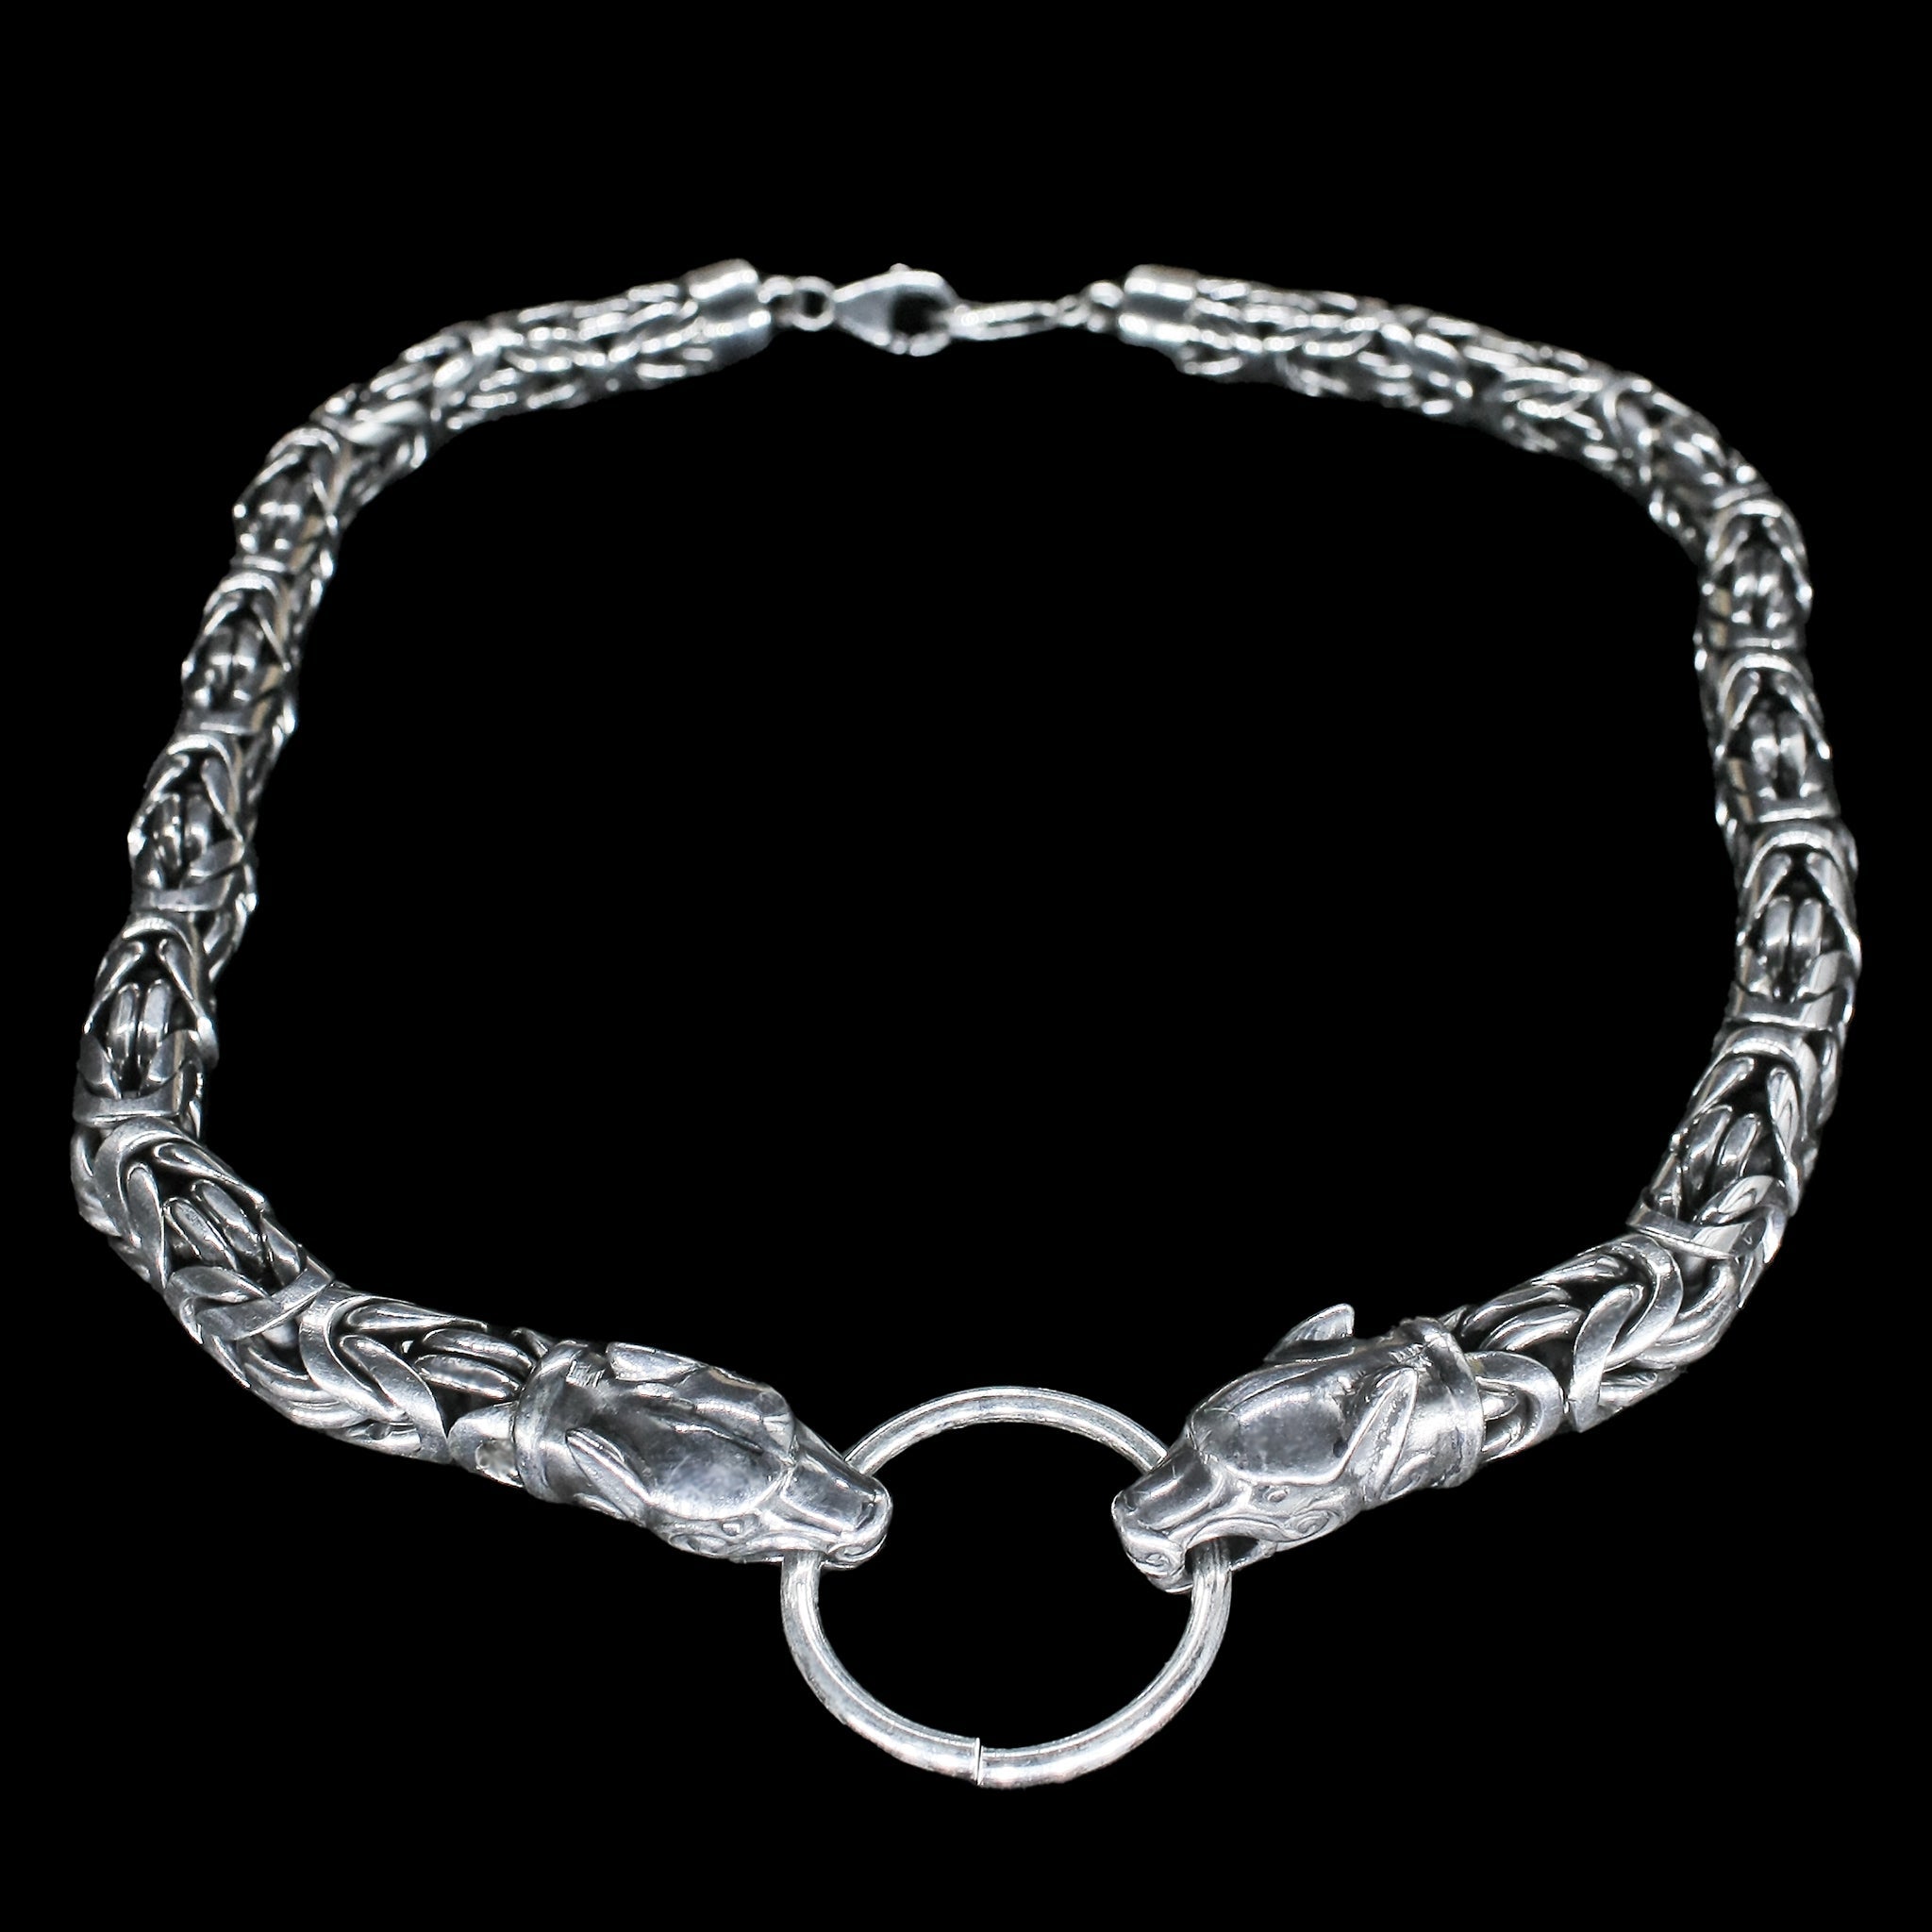 10mm Silver Double King Chain Necklace with Ferocious Wolf Heads Front